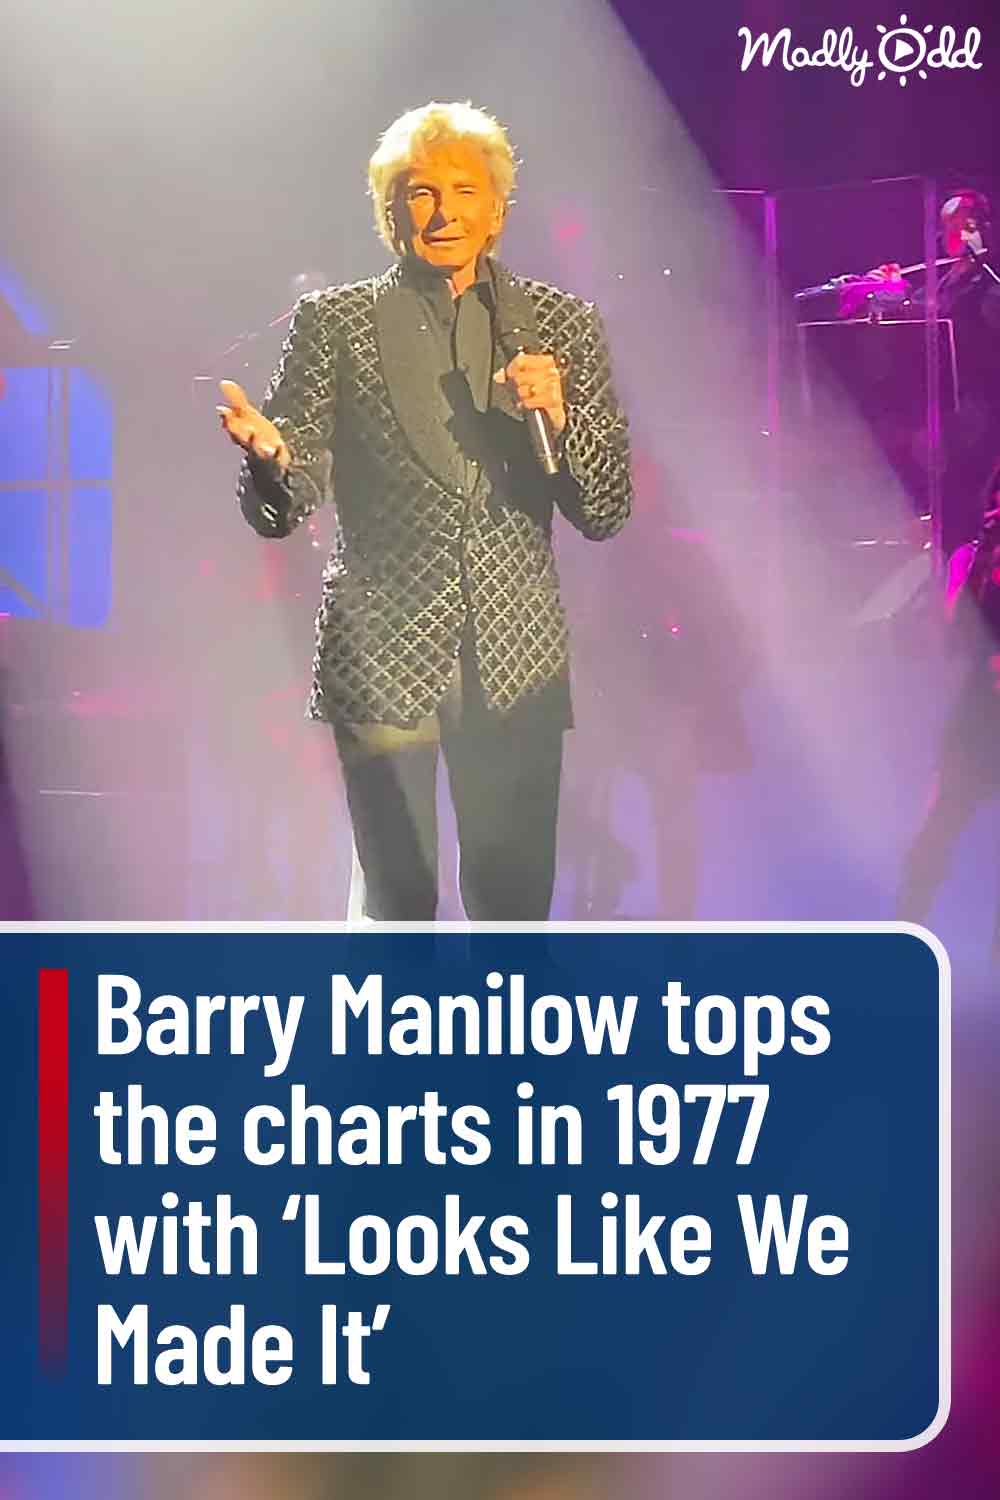 Barry Manilow tops the charts in 1977 with ‘Looks Like We Made It’